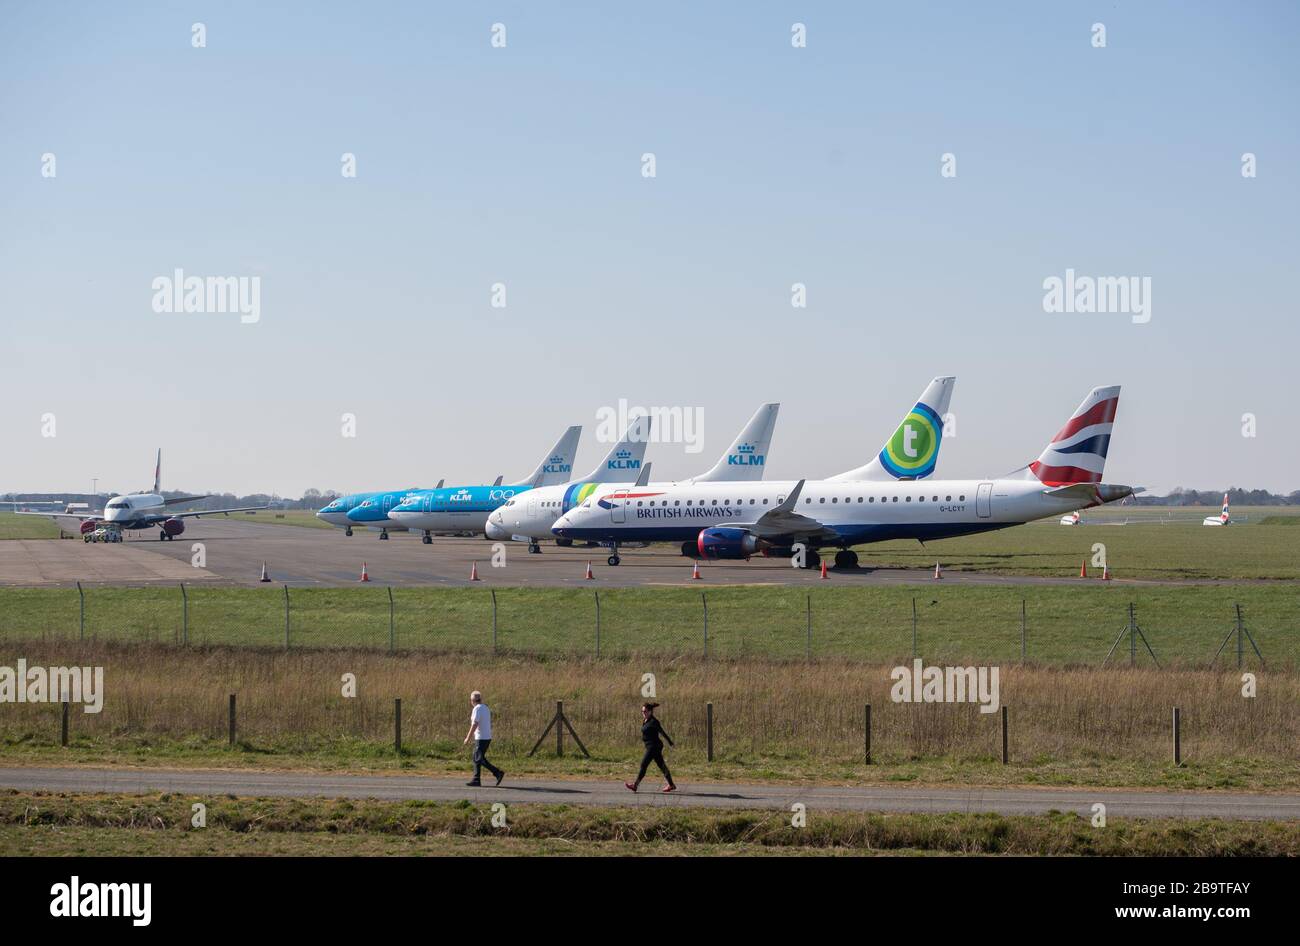 British Airways, KLM and Transavia aircraft parked at Norwich Airport after reduced flights amid travel restrictions and a huge drop in demand as a result of the coronavirus pandemic. Stock Photo